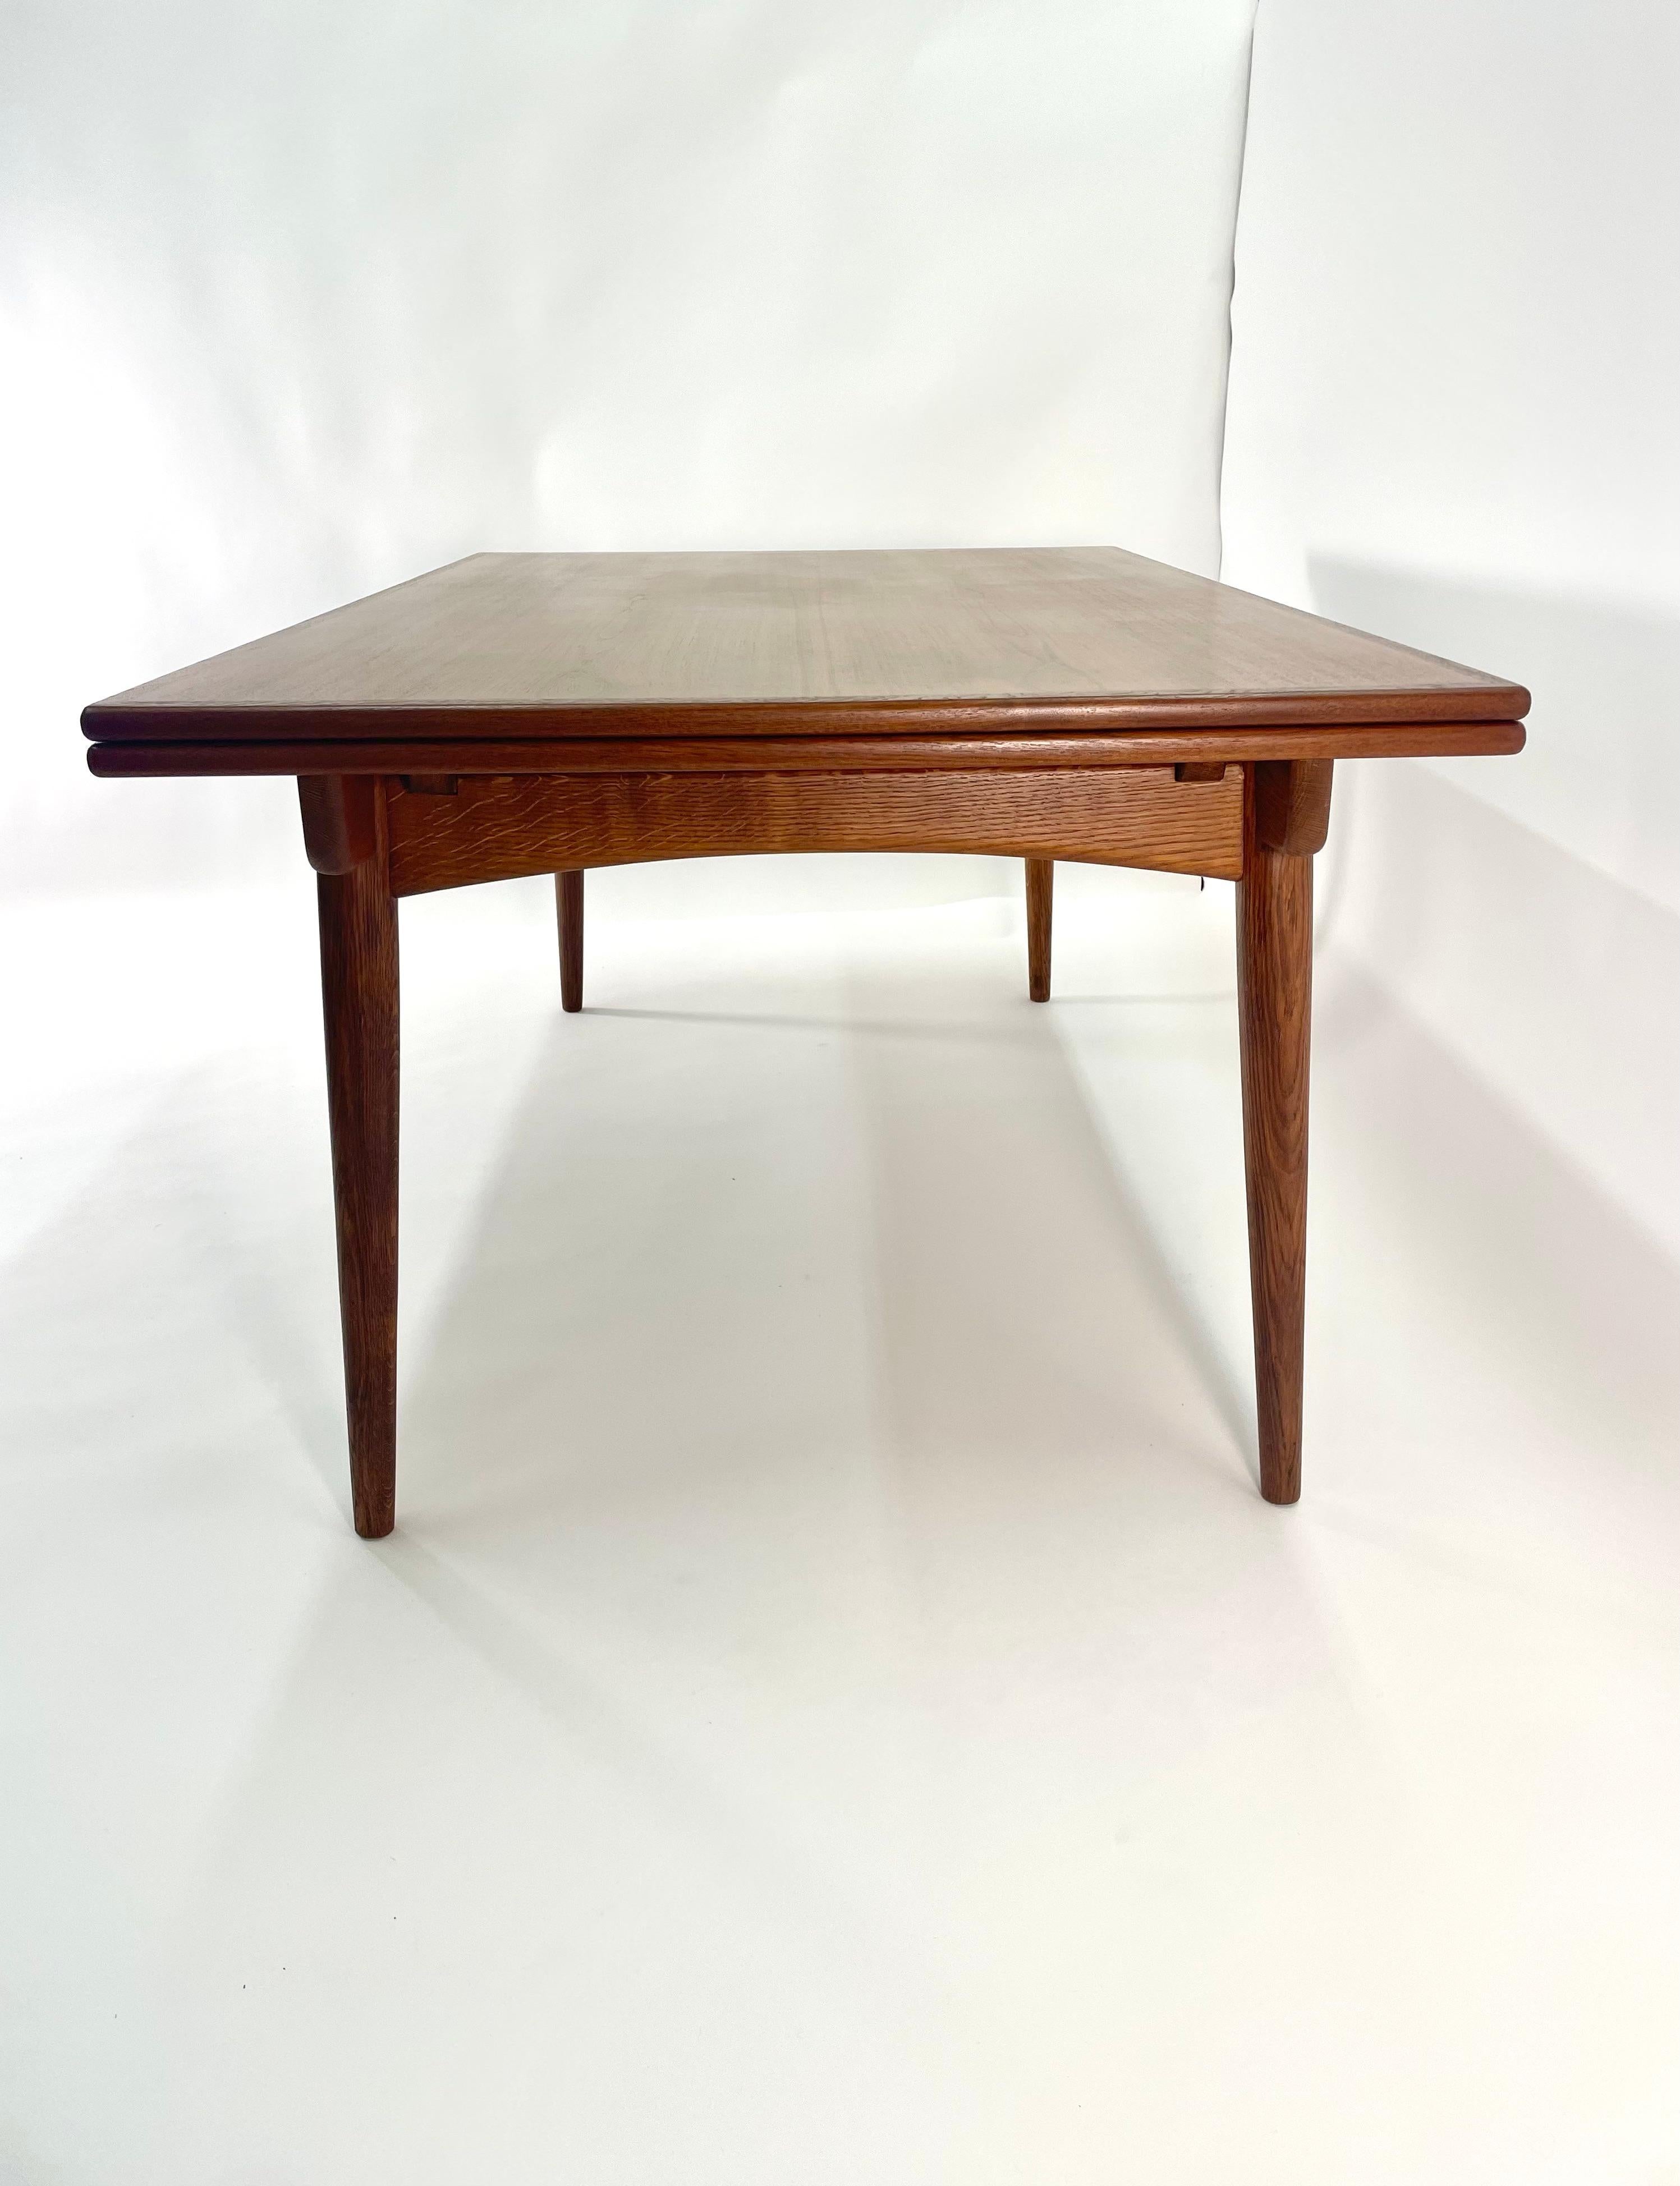 Hans Wegner  AT-312 Sculpted Teak & Oak Dining for Andreas Tuck. Made in Denmark, Large draw leaf dining table. Leaves conveniently store under the table when not in use and easily pull out when needed. This table is very wide compared to most